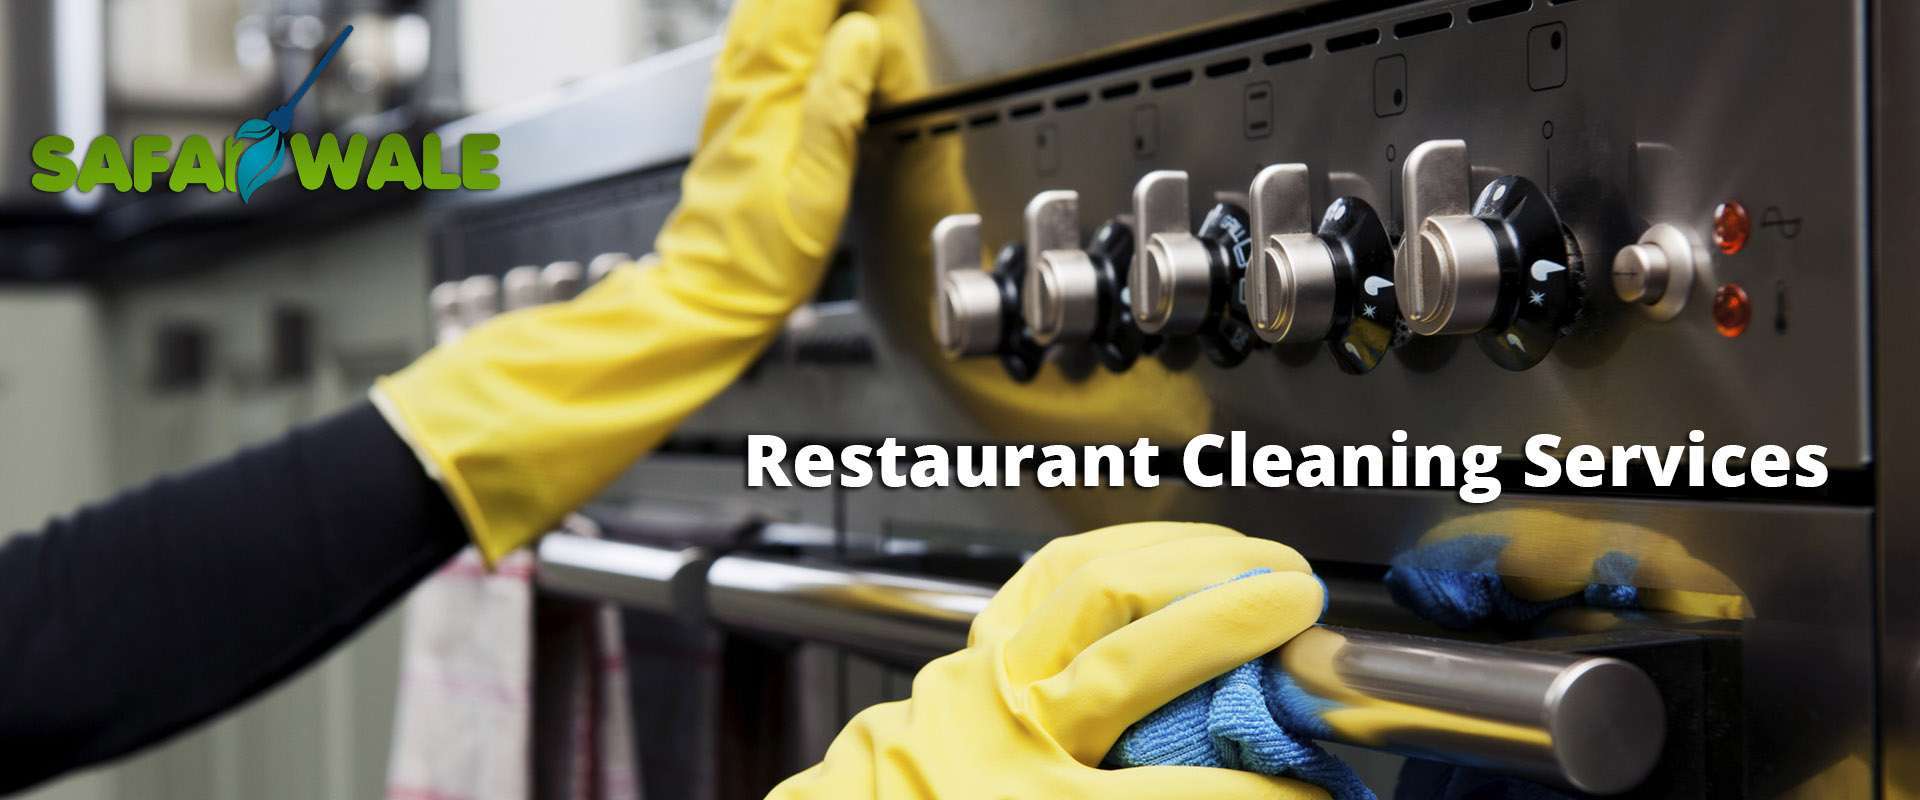 restaurant cleaning services in Jaipur